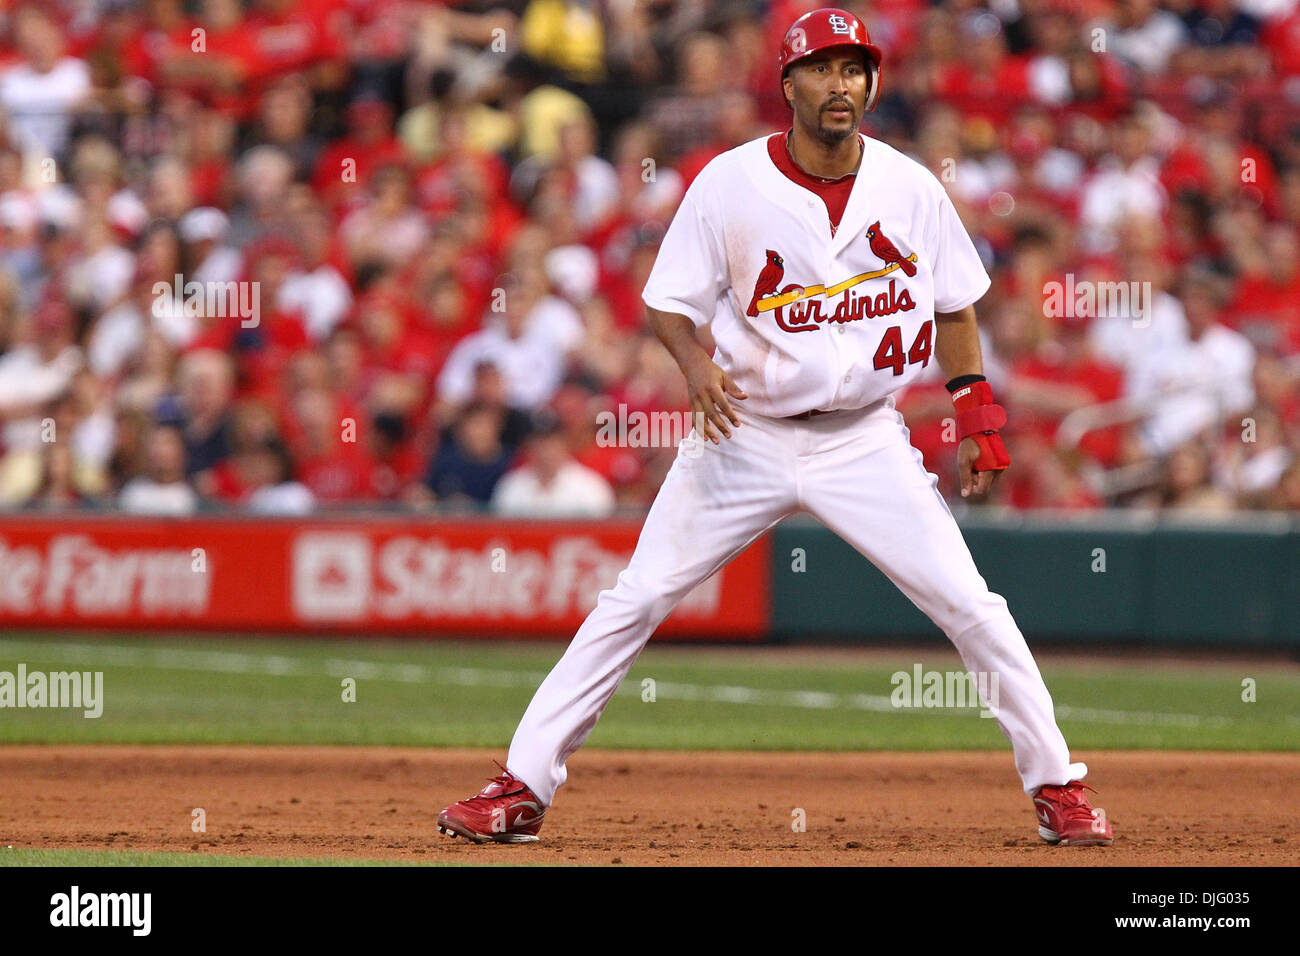 St. Louis Cardinals center fielder Randy Winn (44) takes long lead off  first base during the Cardinals game against the Arizona Diamondbacks on  Tuesday at Busch Stadium in St. Louis, Missouri. (Credit